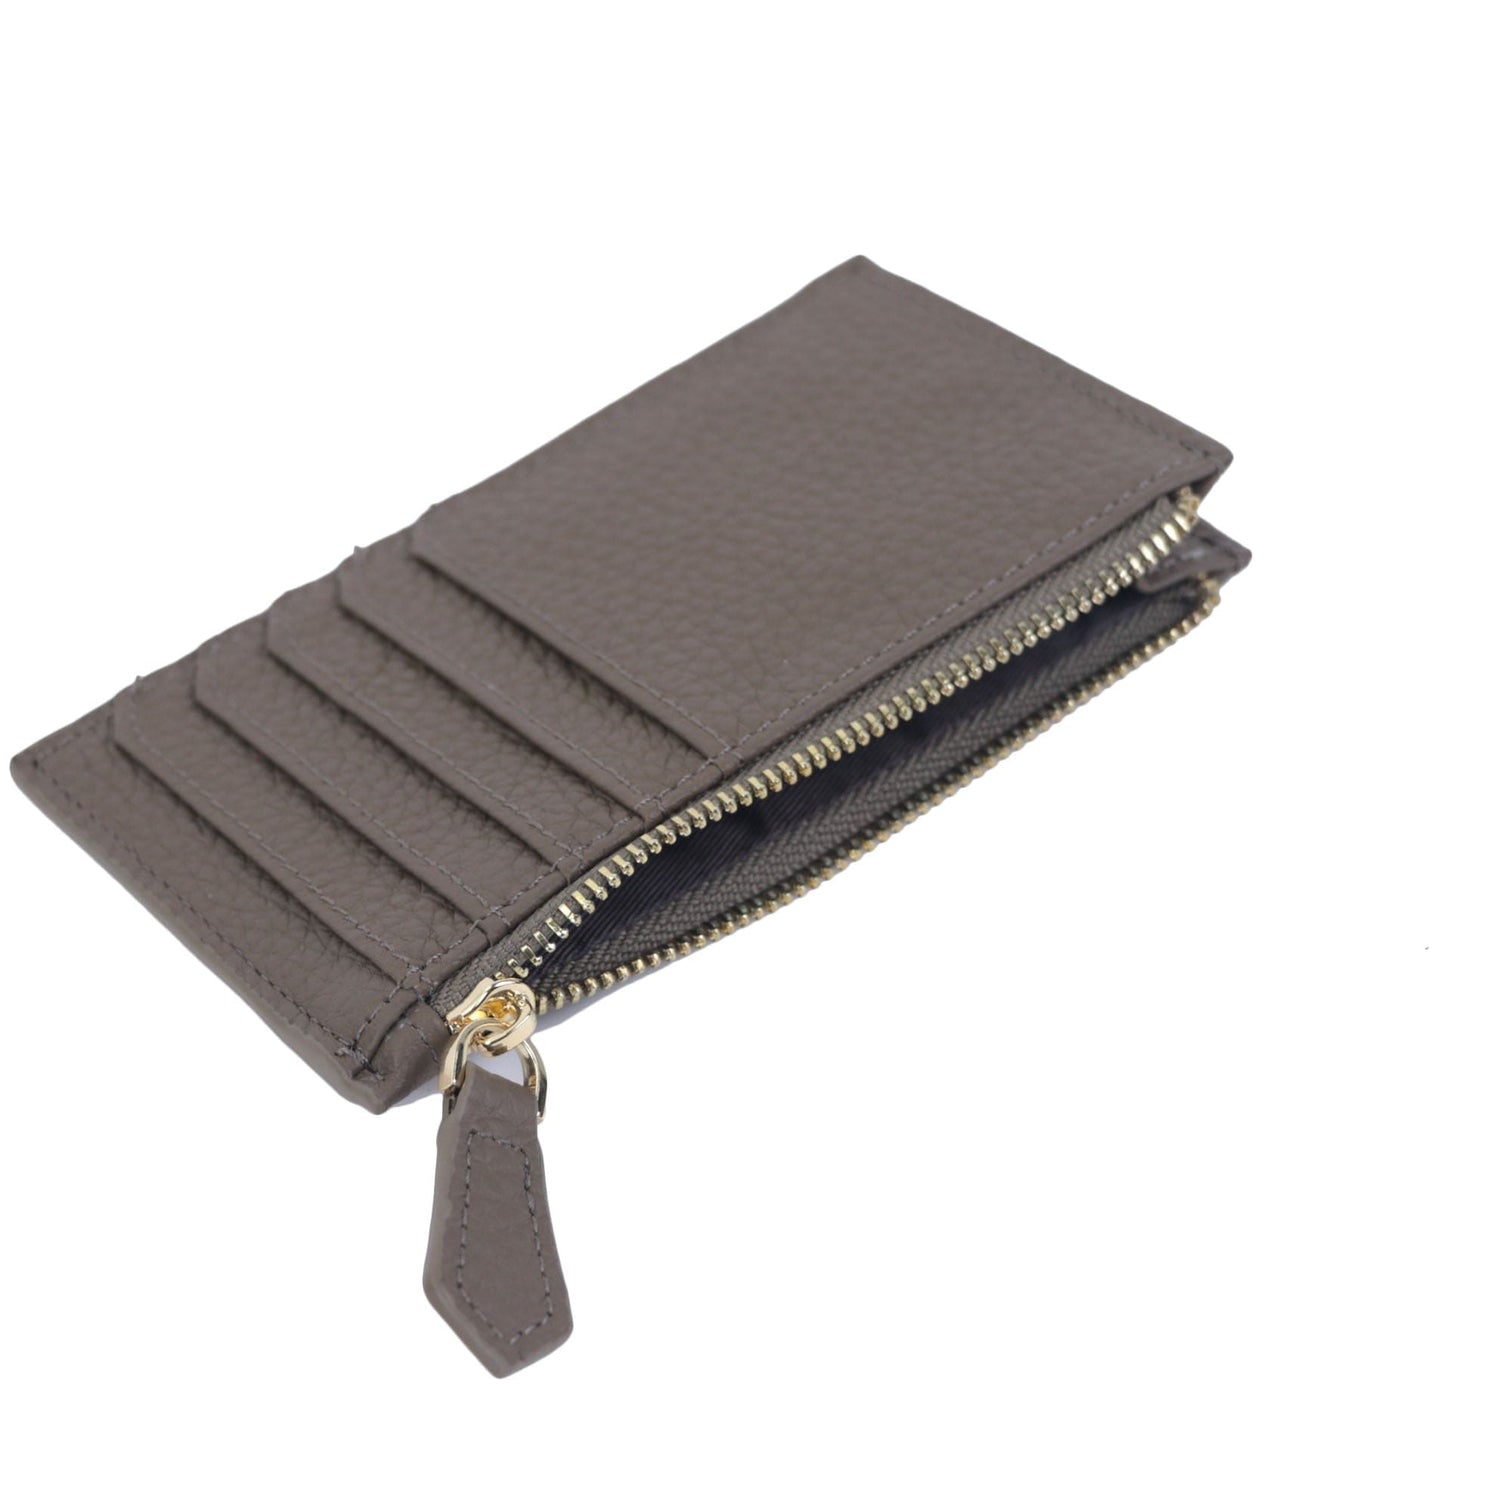 Luxury Genuine leather Men's Wallet with Coin Pocket Zipper